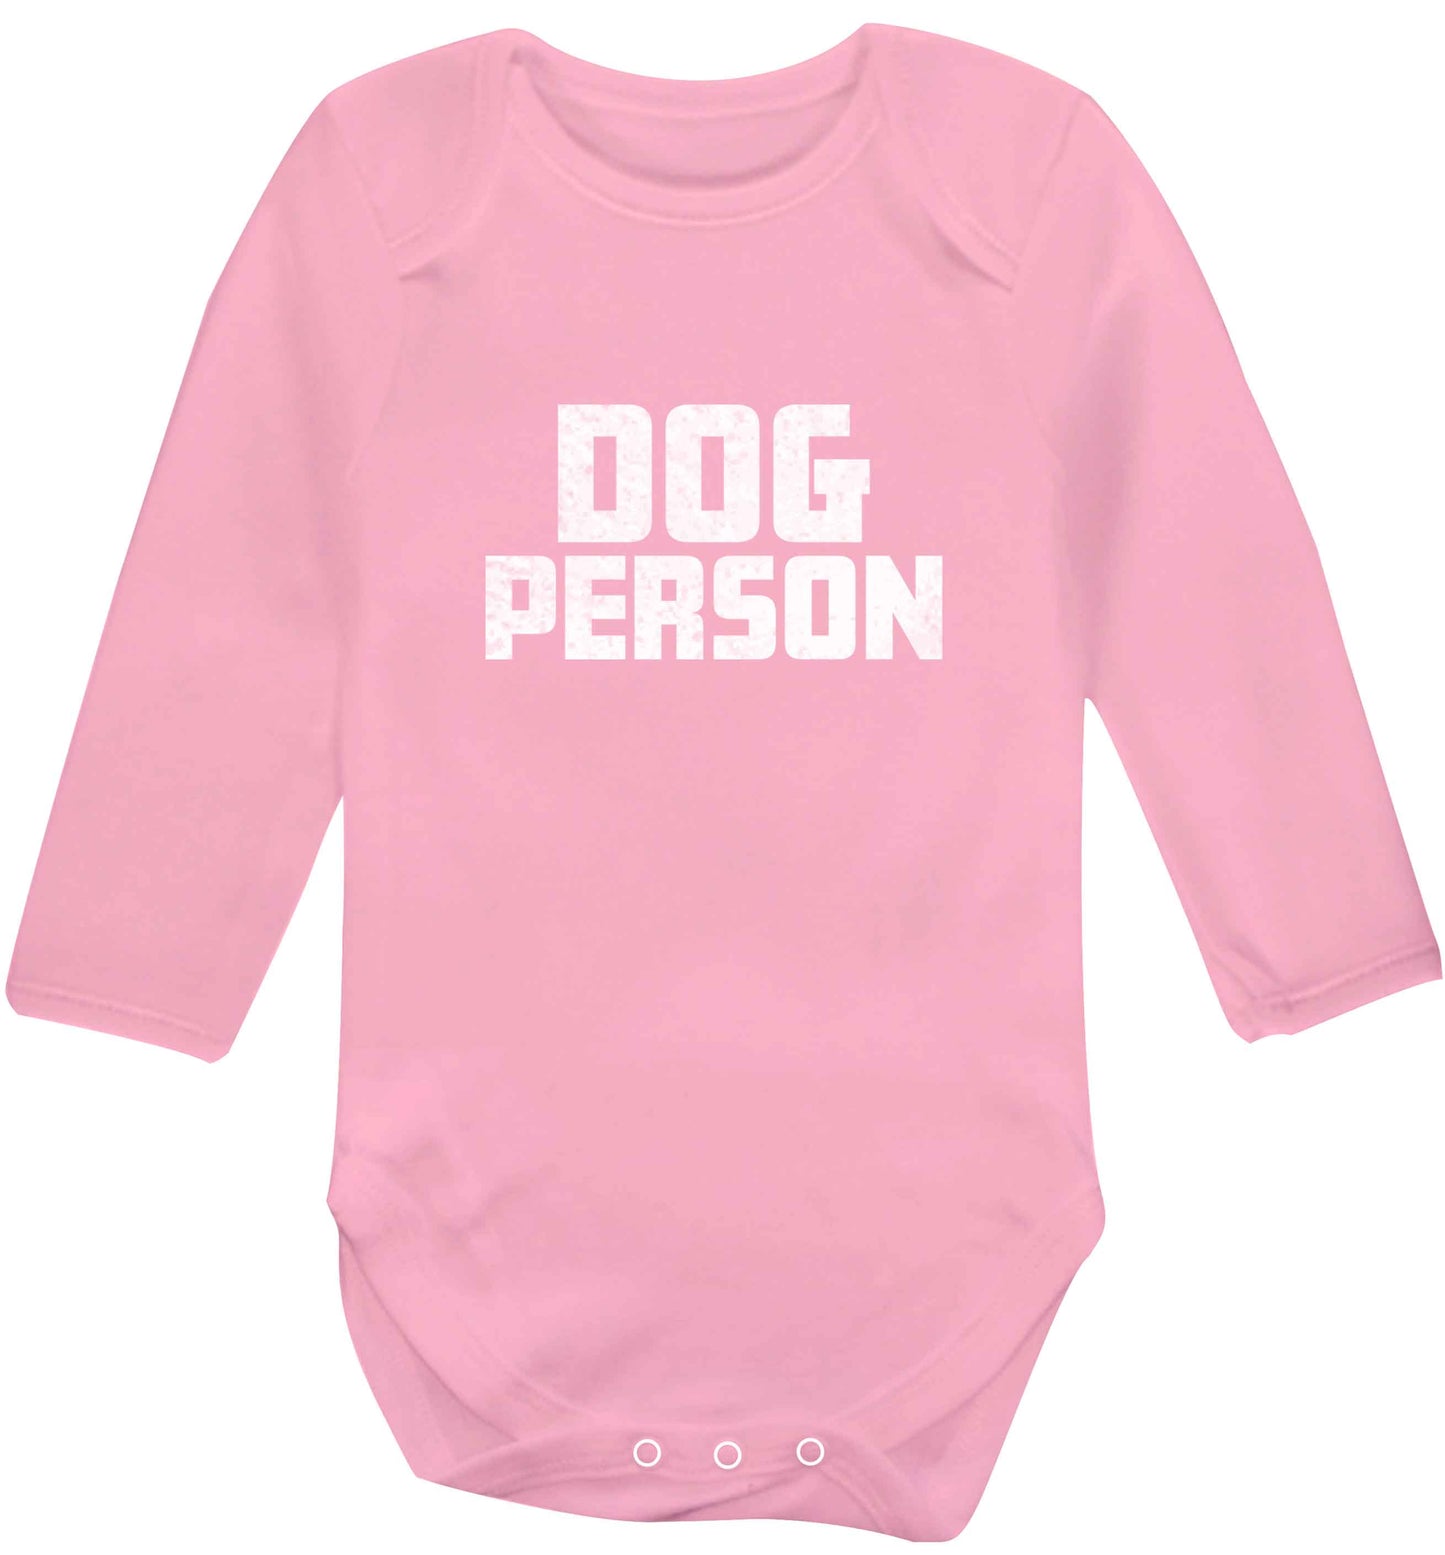 Dog Person Kit baby vest long sleeved pale pink 6-12 months